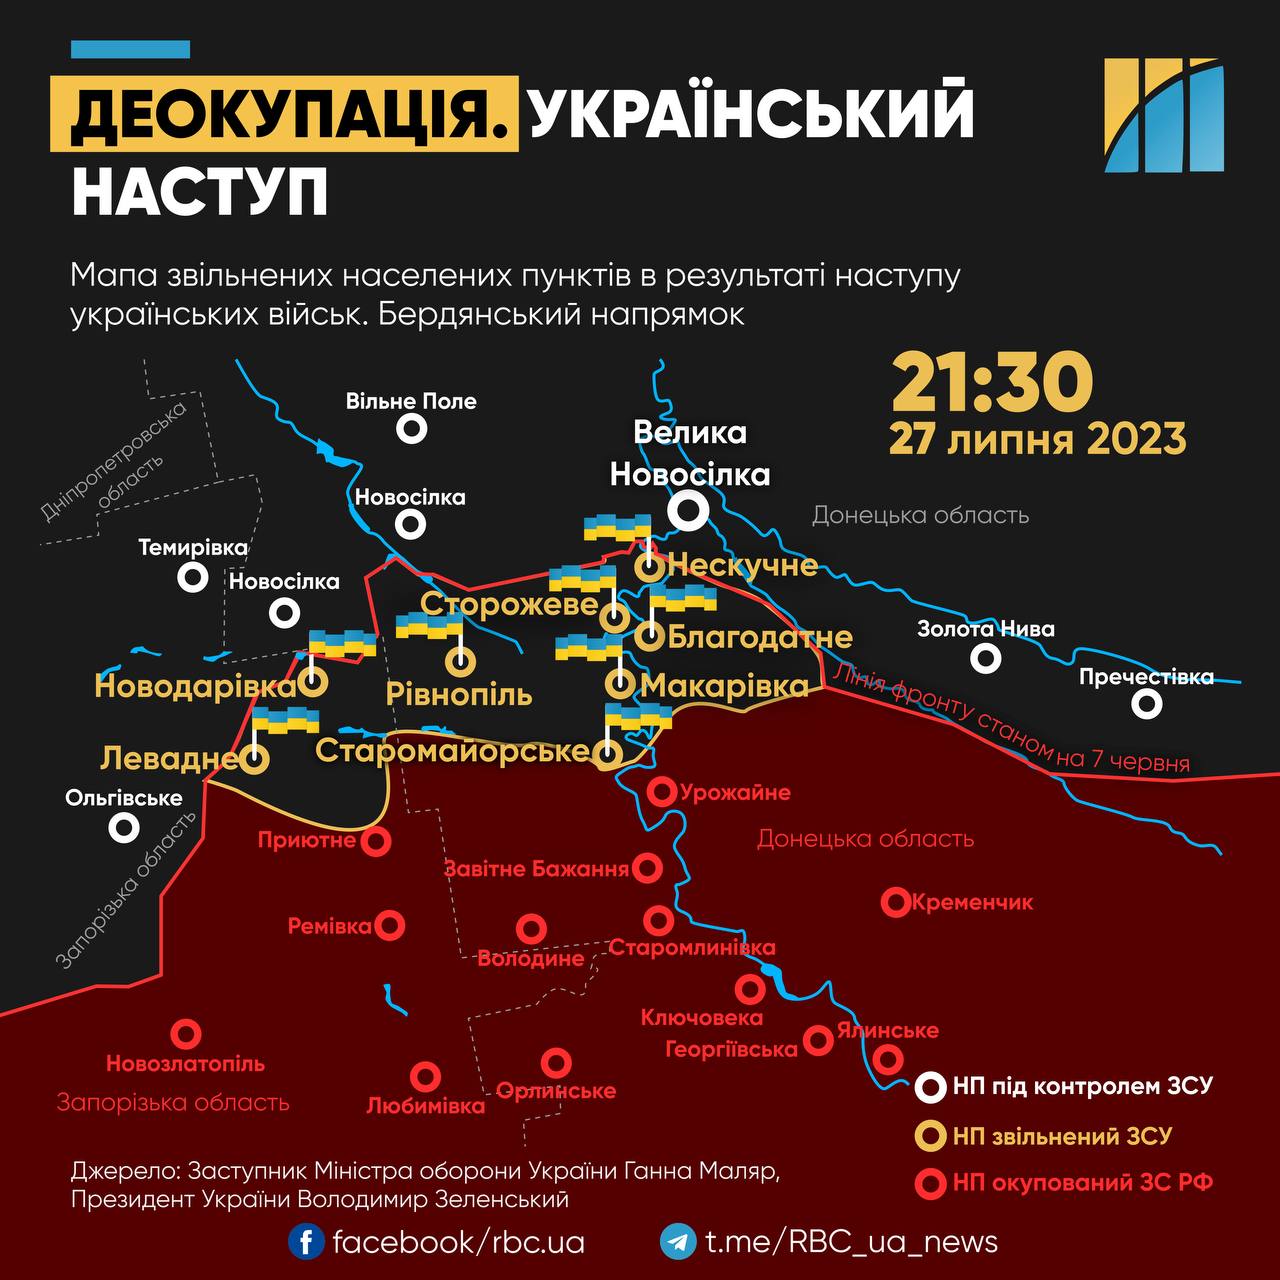 The Armed Forces of Ukraine are advancing in the Donetsk region.  The General Staff reported on the successes at the front